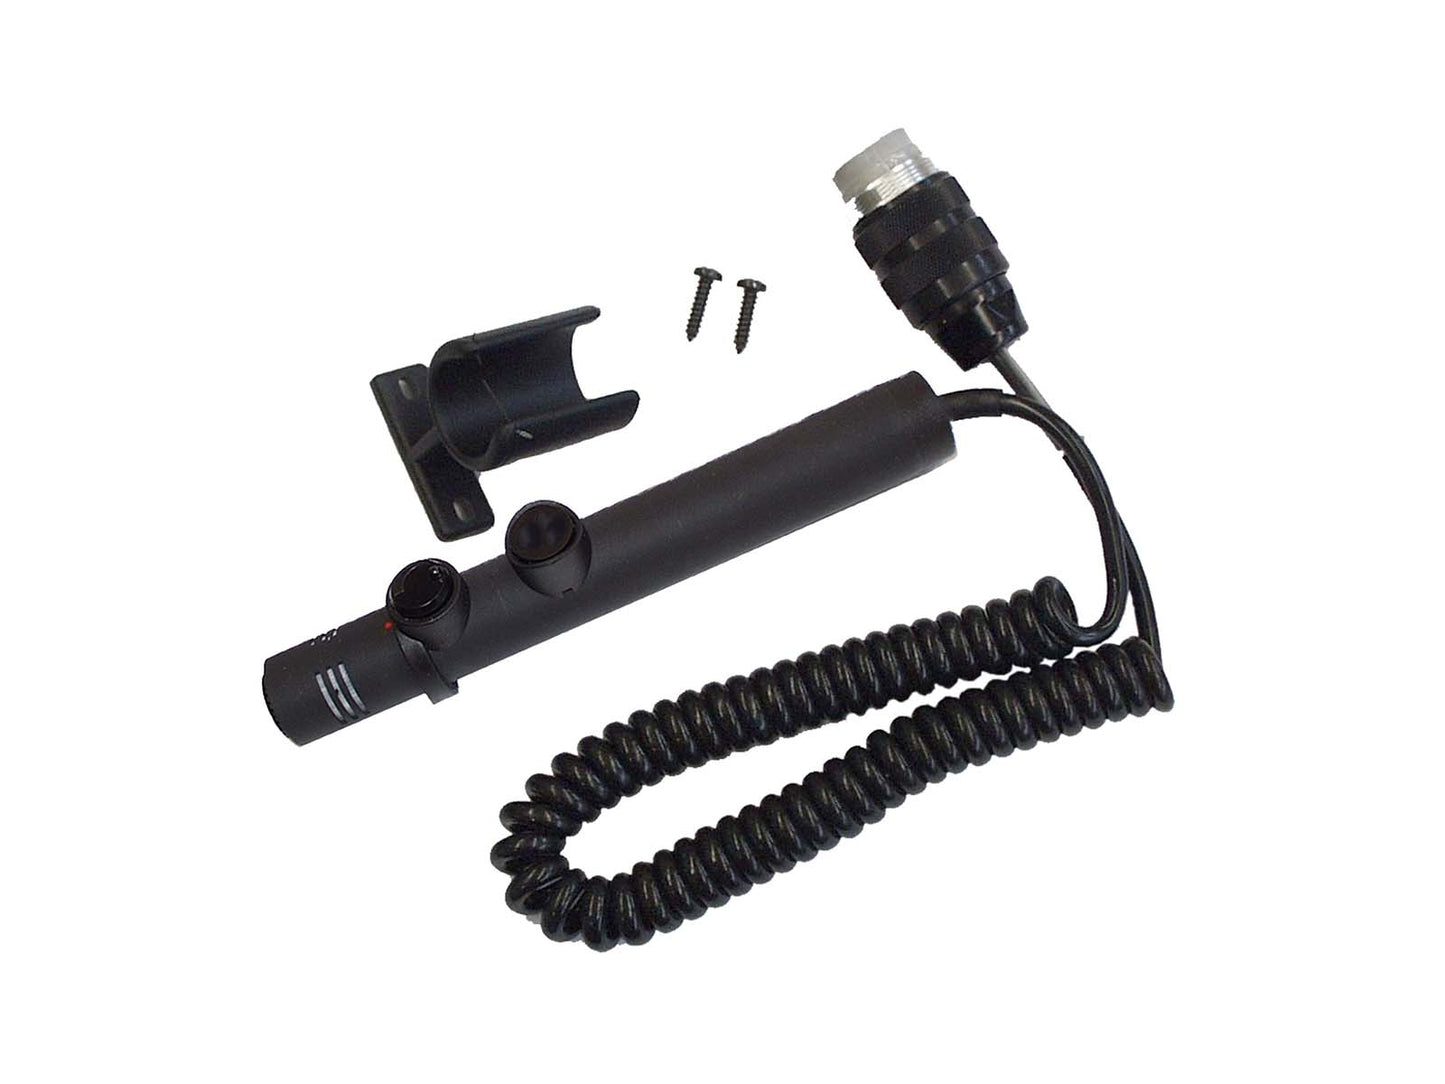 Standby microphone MIK450A active microphone